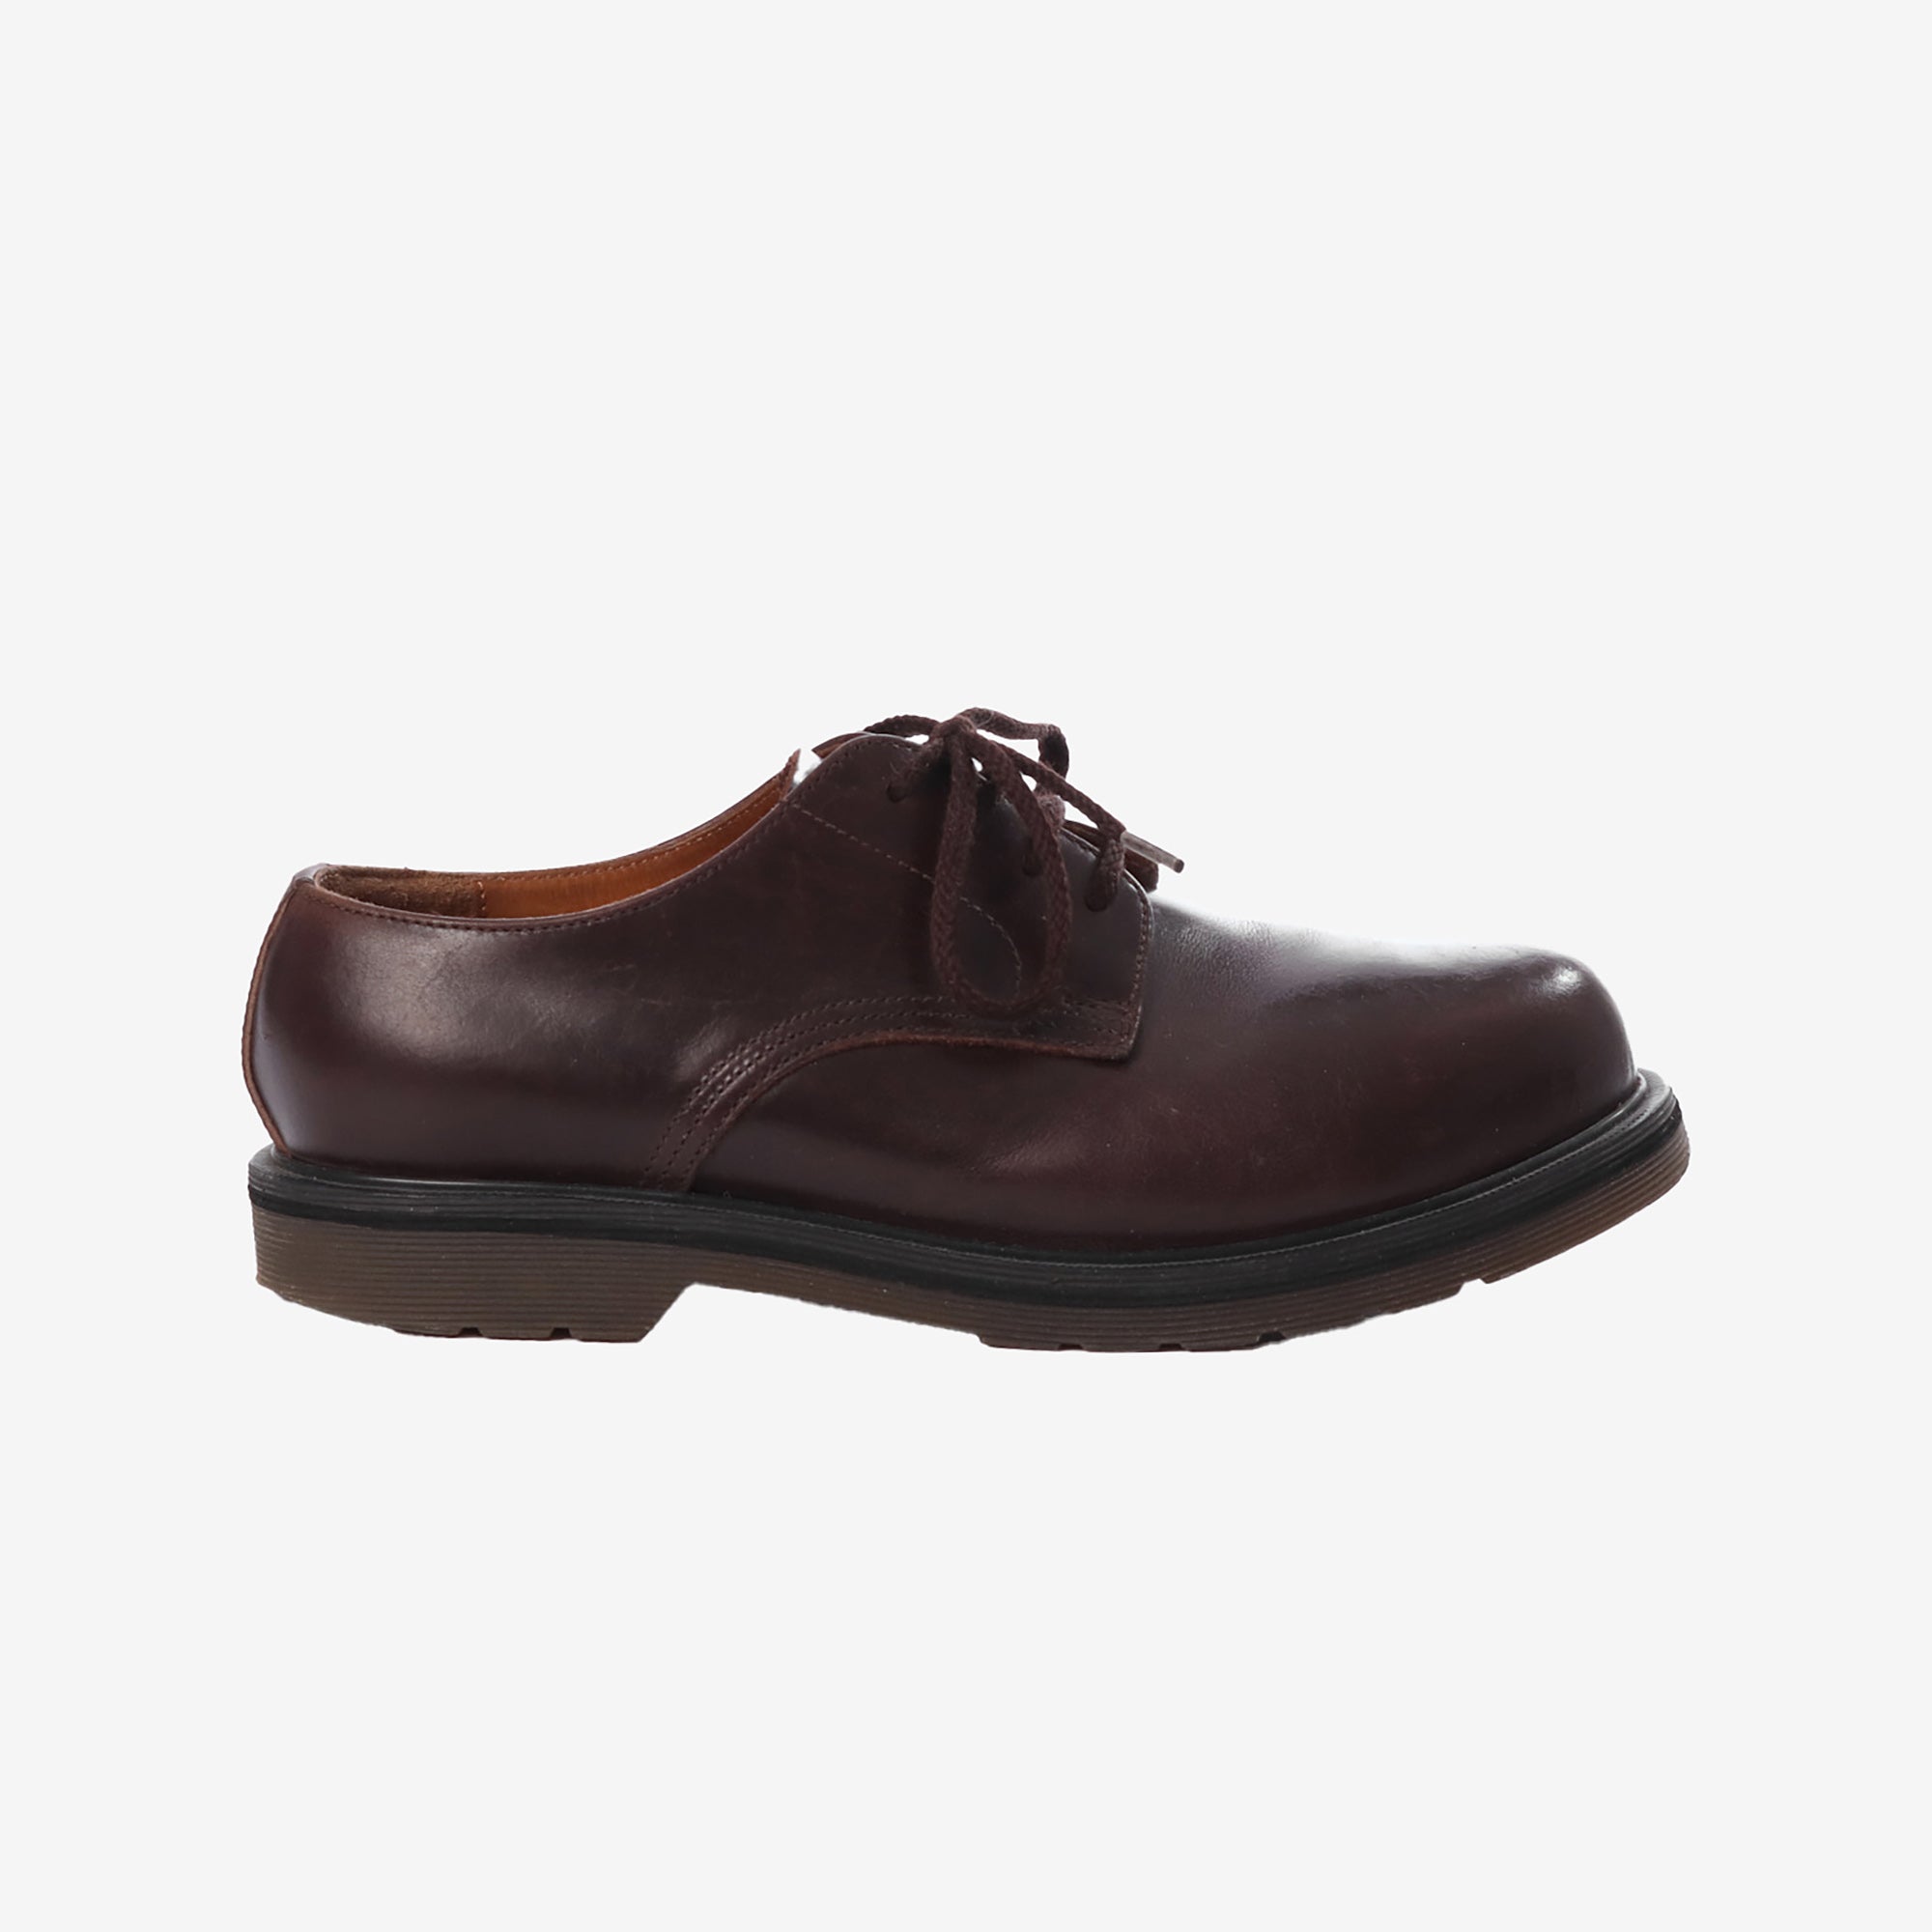 Capped Derby Shoes